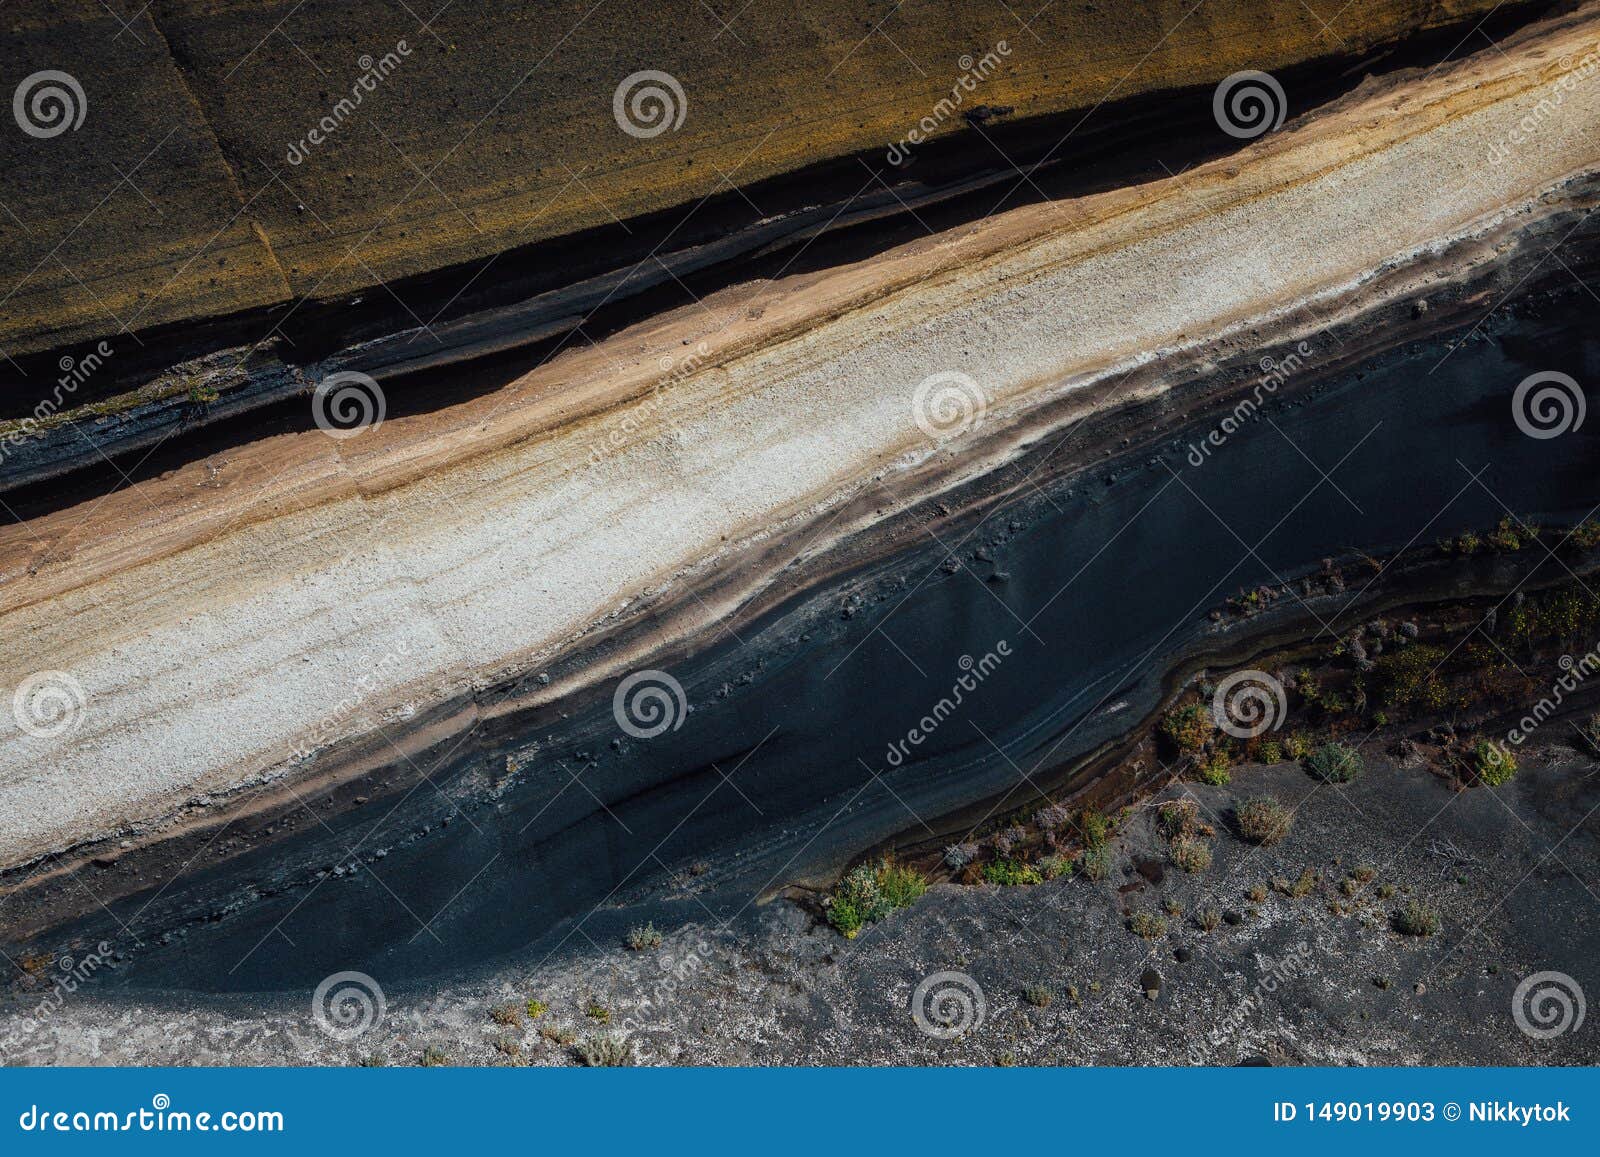 stratum of earth crust in cross-section, abstract background